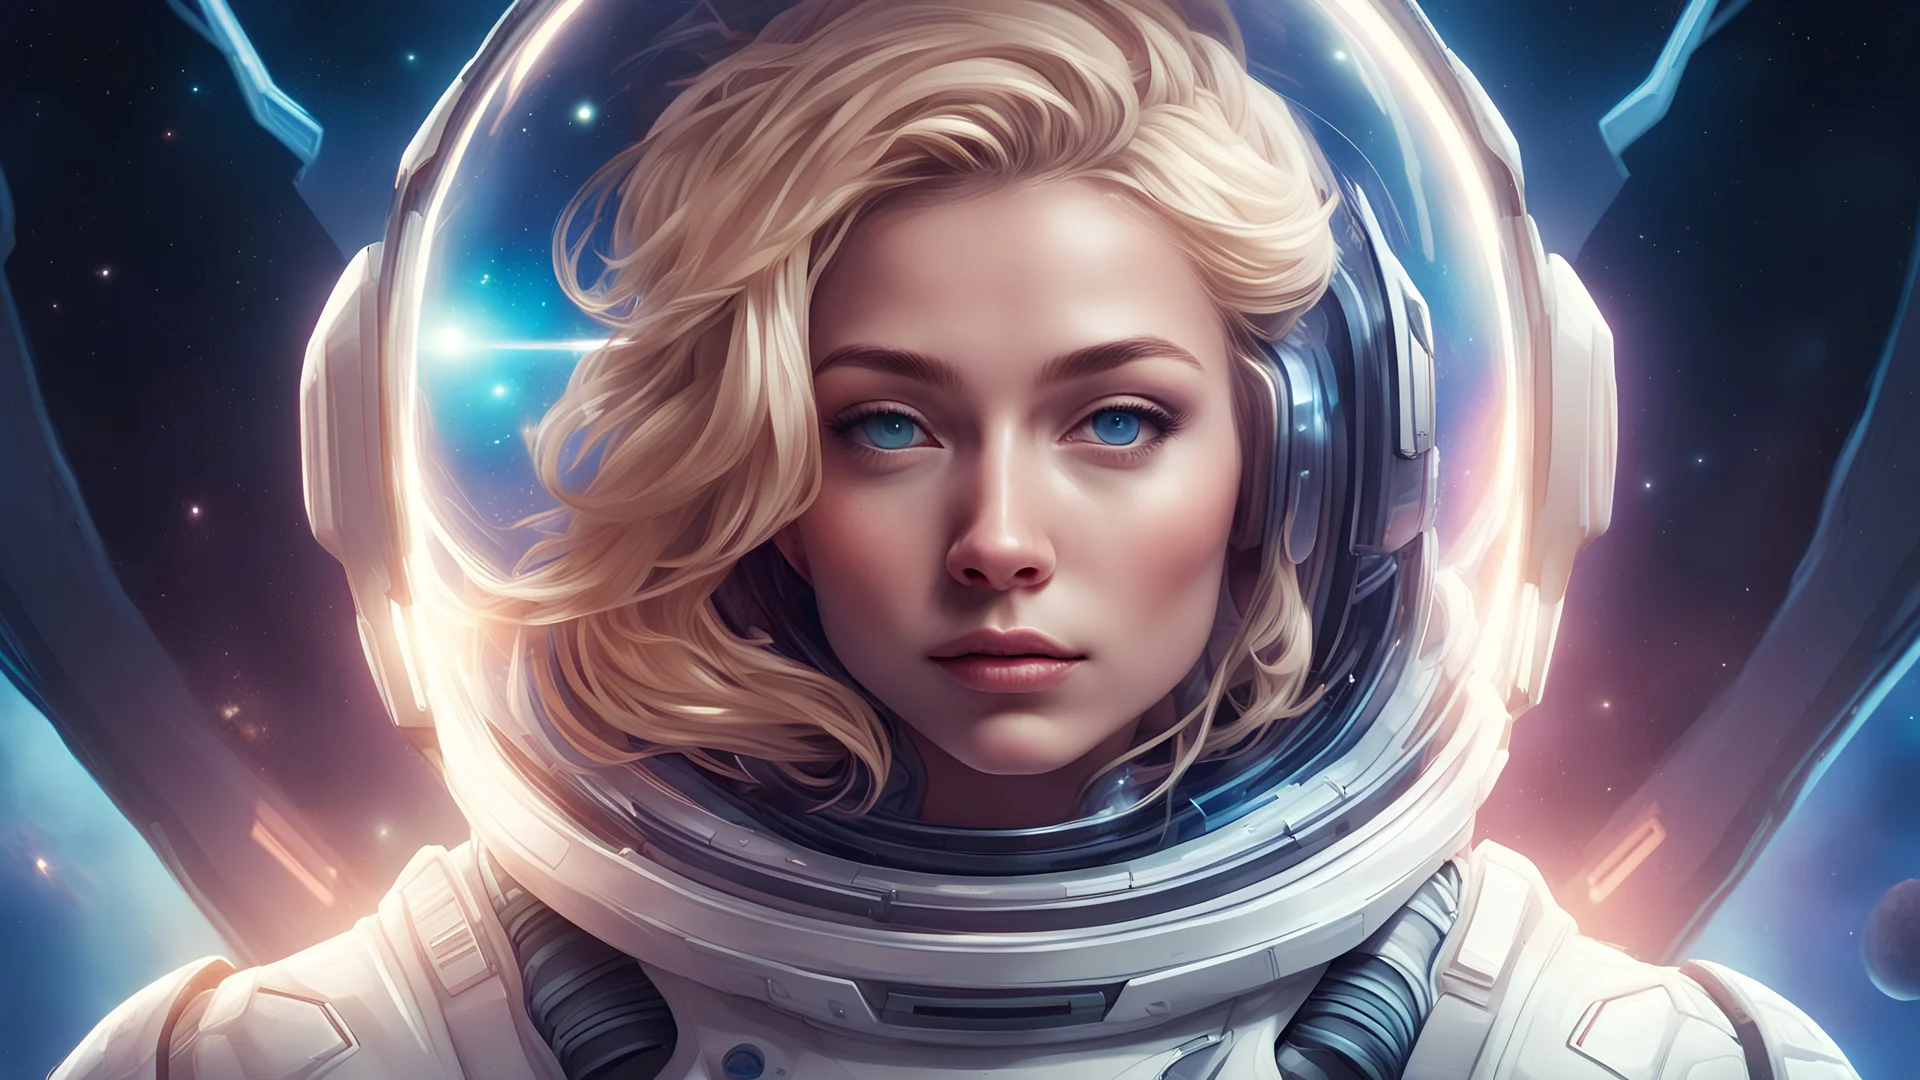 a woman in a space suit with a helmet on, portrait armored astronaut girl, portrait anime space cadet girl, beautiful woman in spacesuit, girl in space, blonde girl in a cosmic dress, in spacesuit, futuristic astronaut, portrait beautiful sci - fi girl, glowwave girl portrait, scifi woman, wearing futuristic space gear, jen bartel, glowing spacesuit